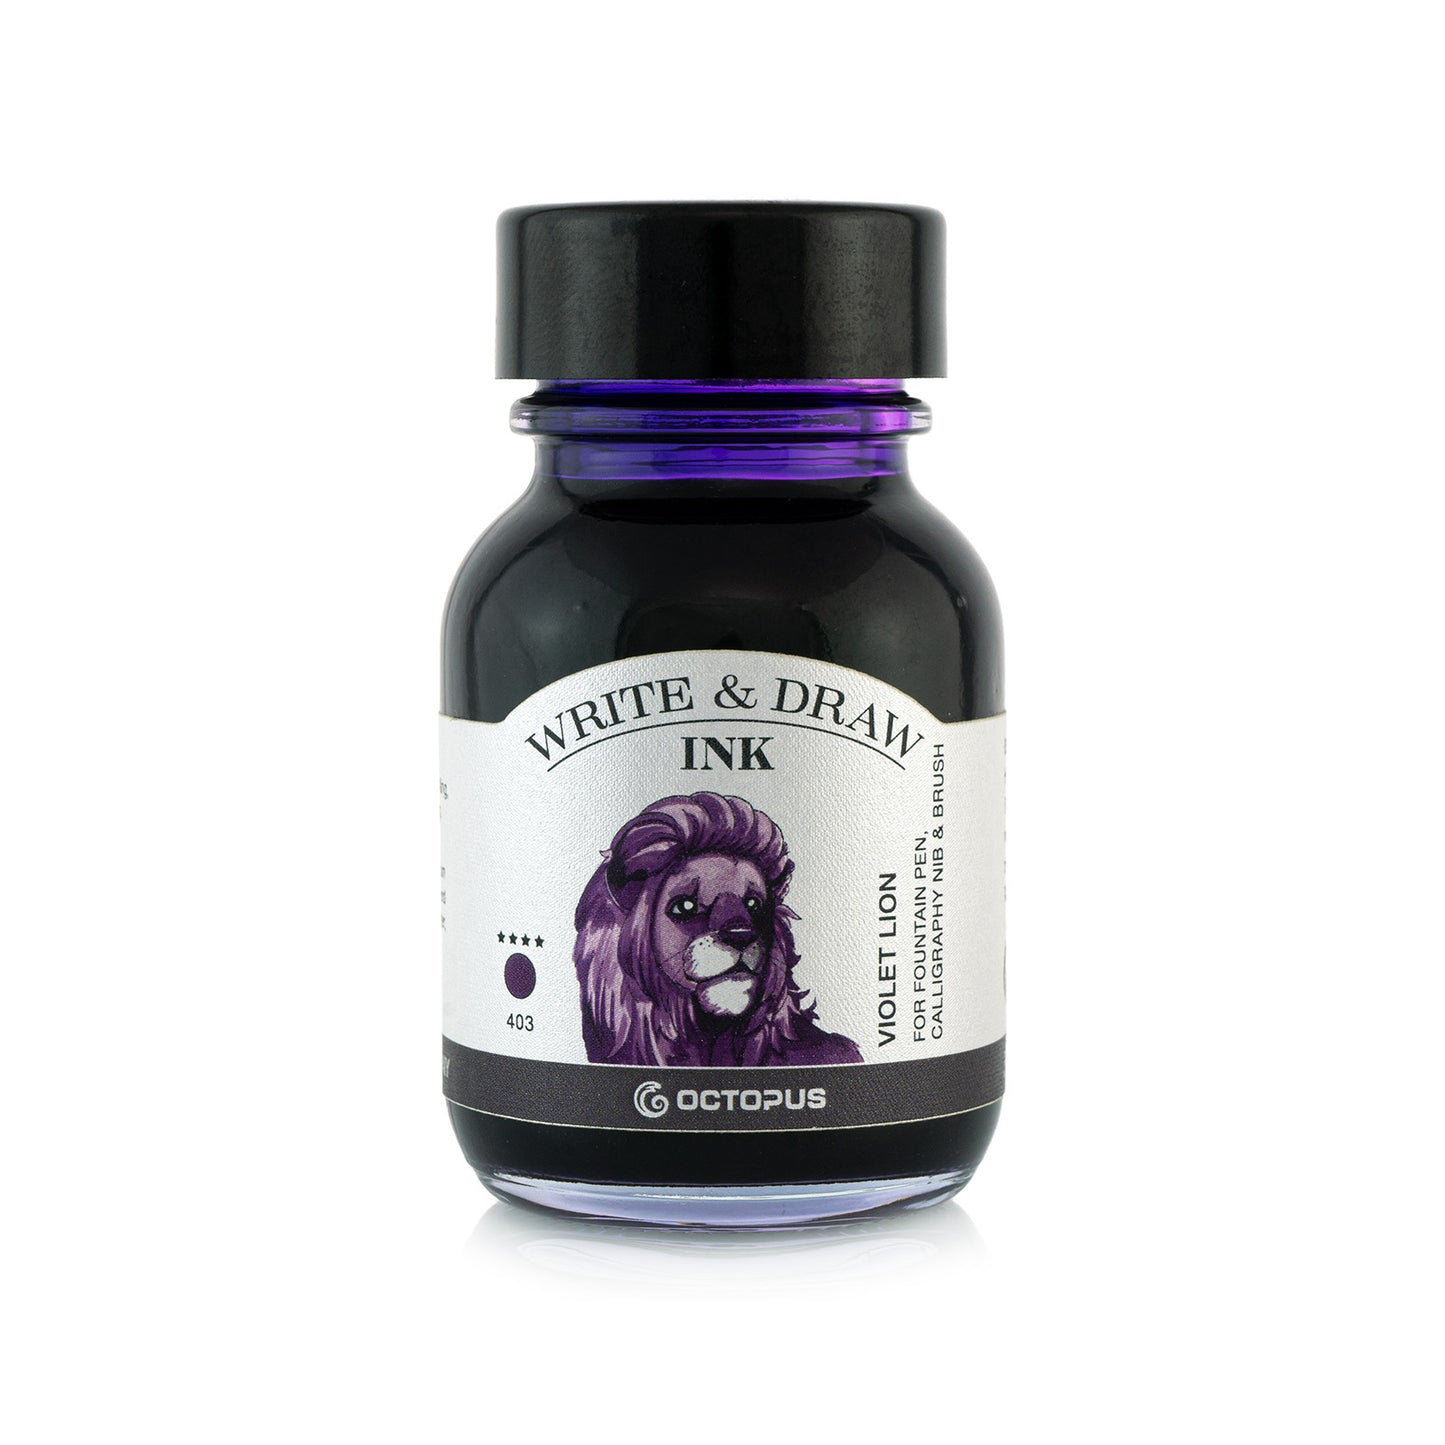 Octopus Write and Draw Ink, 
 403 Violet Lion